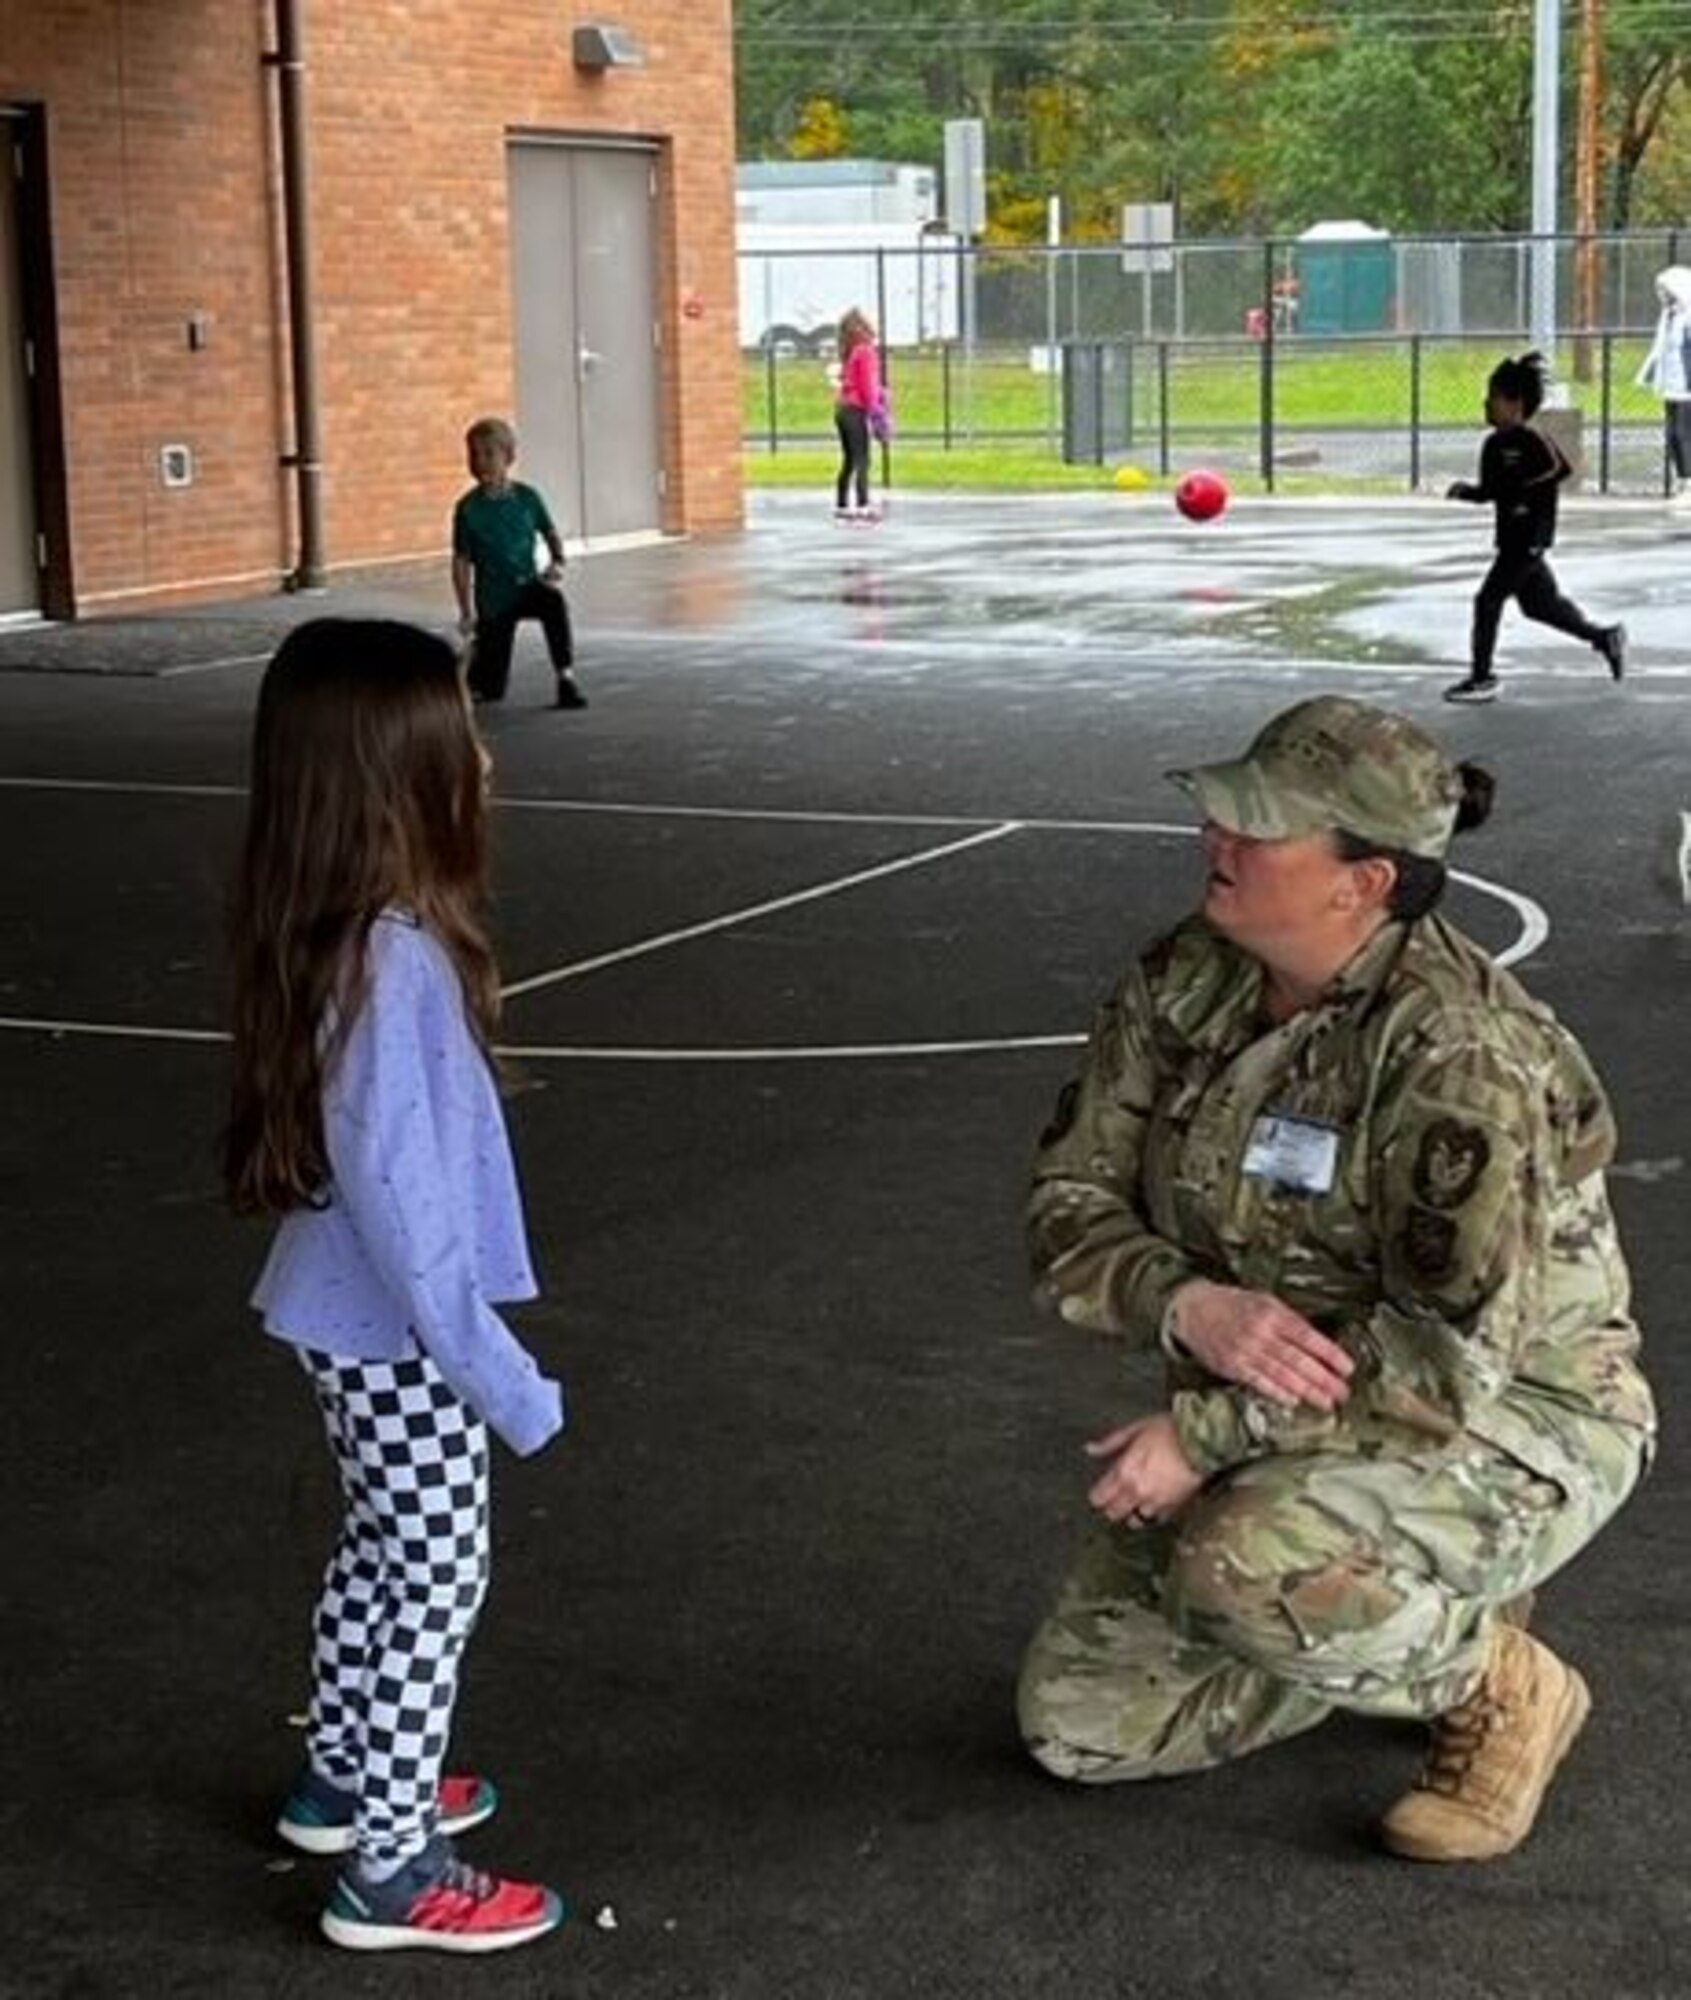 The Partnership in Education or PIE program, which is designed to enhance educational opportunities for youth and community outreach efforts for JBLM service members.